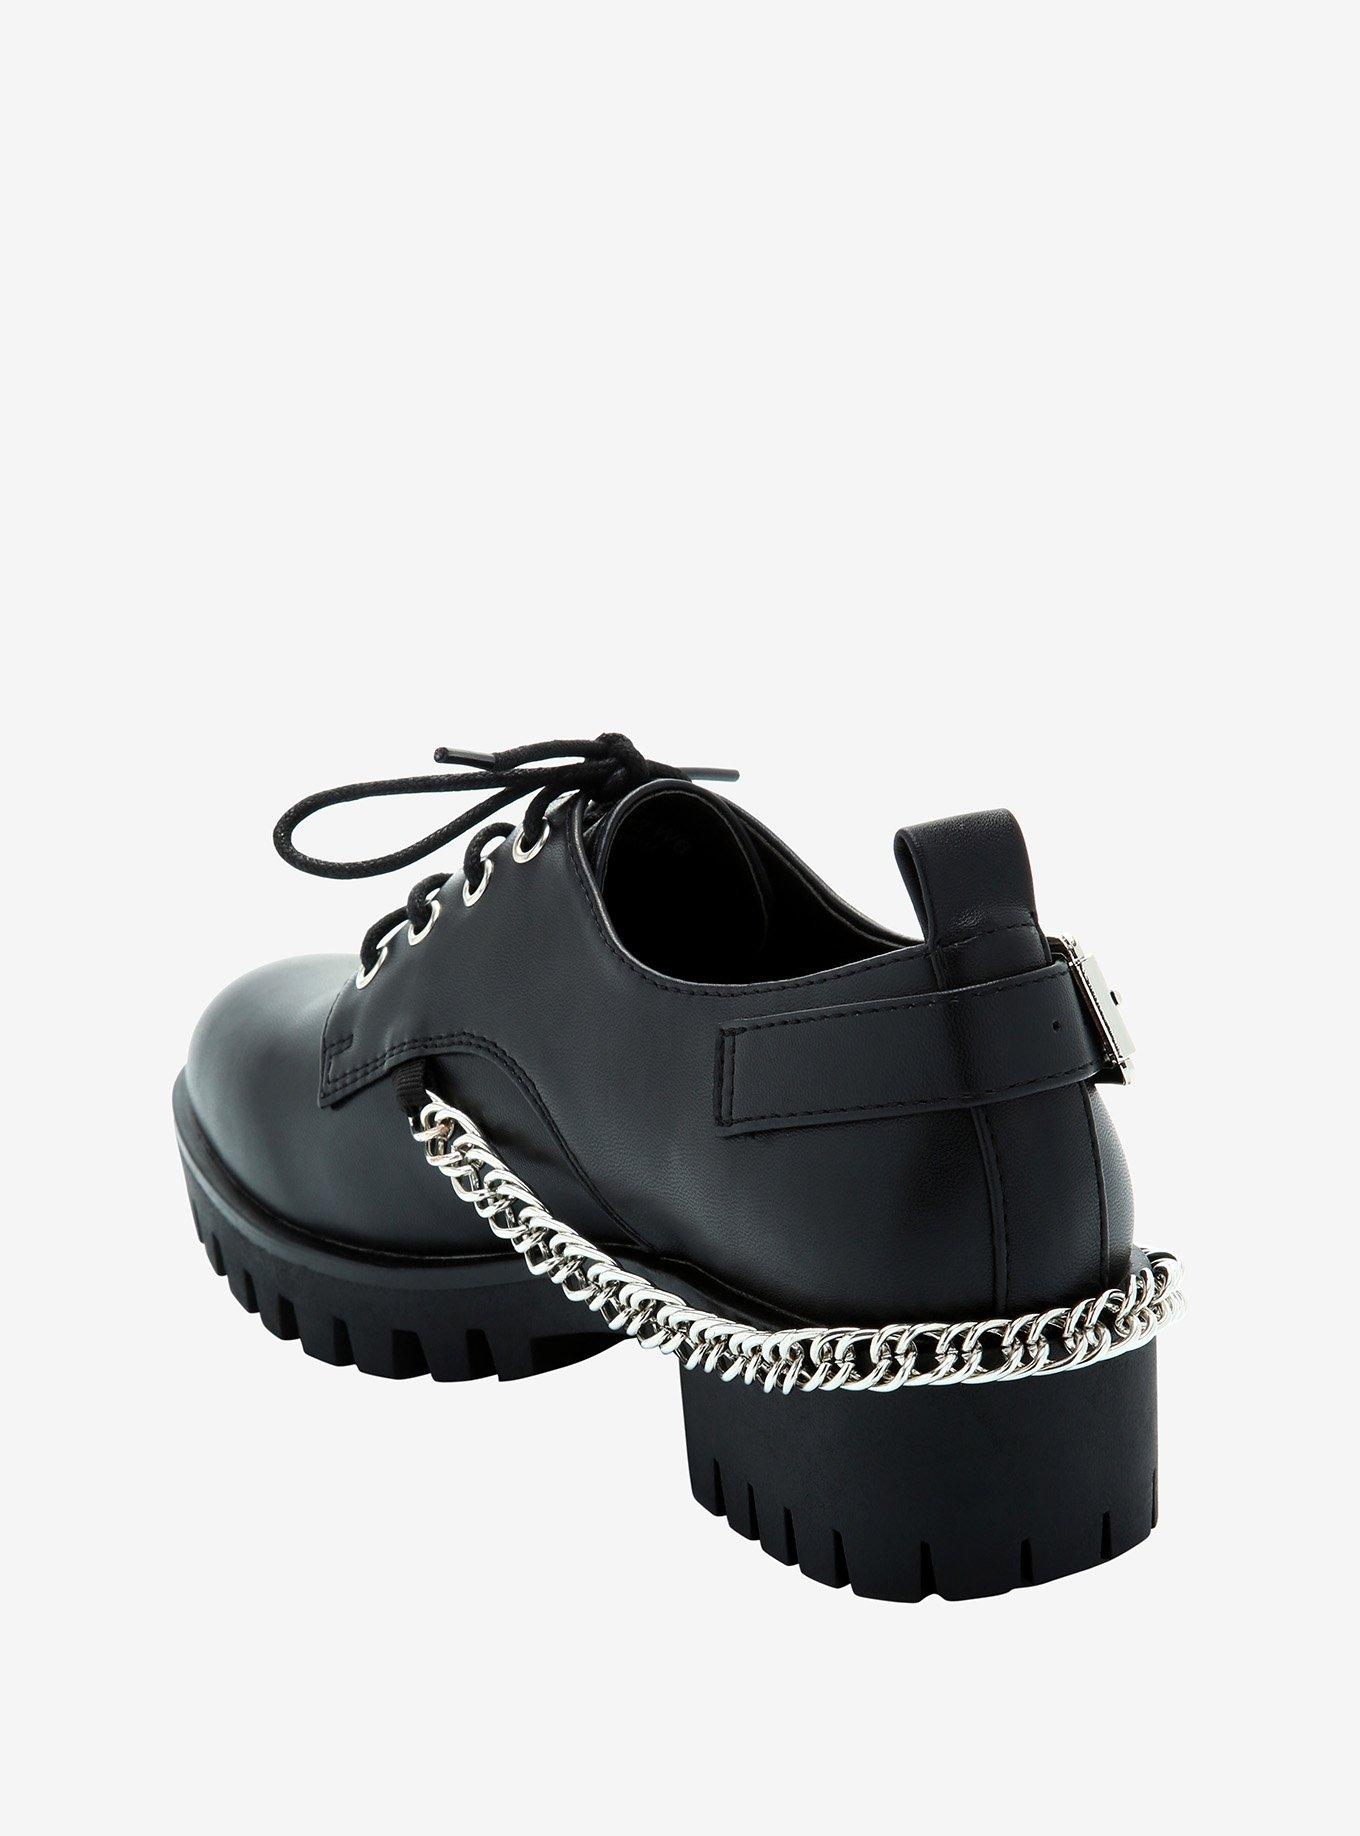 Black Buckle & Chain Lace-Up Oxfords, MULTI, alternate